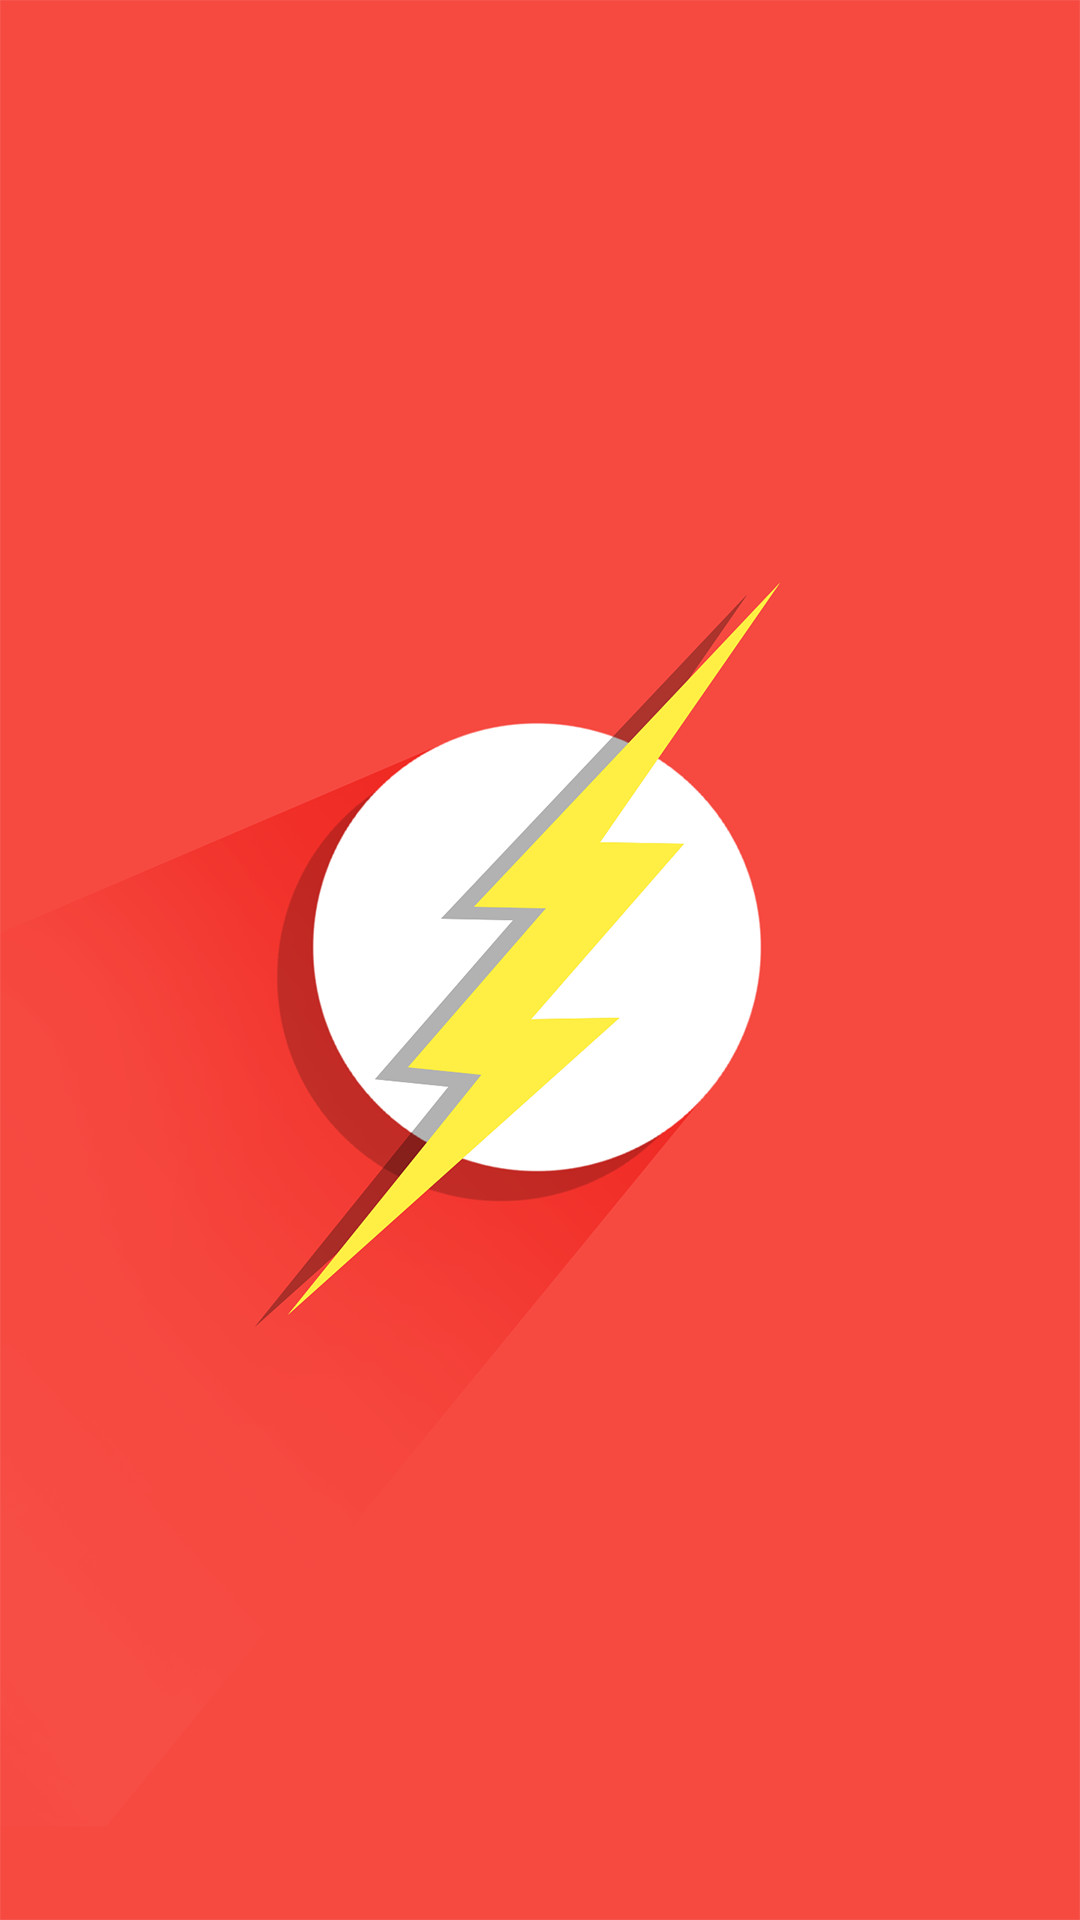 The Flash Wallpaper iPhone 6 Plus by lirking20